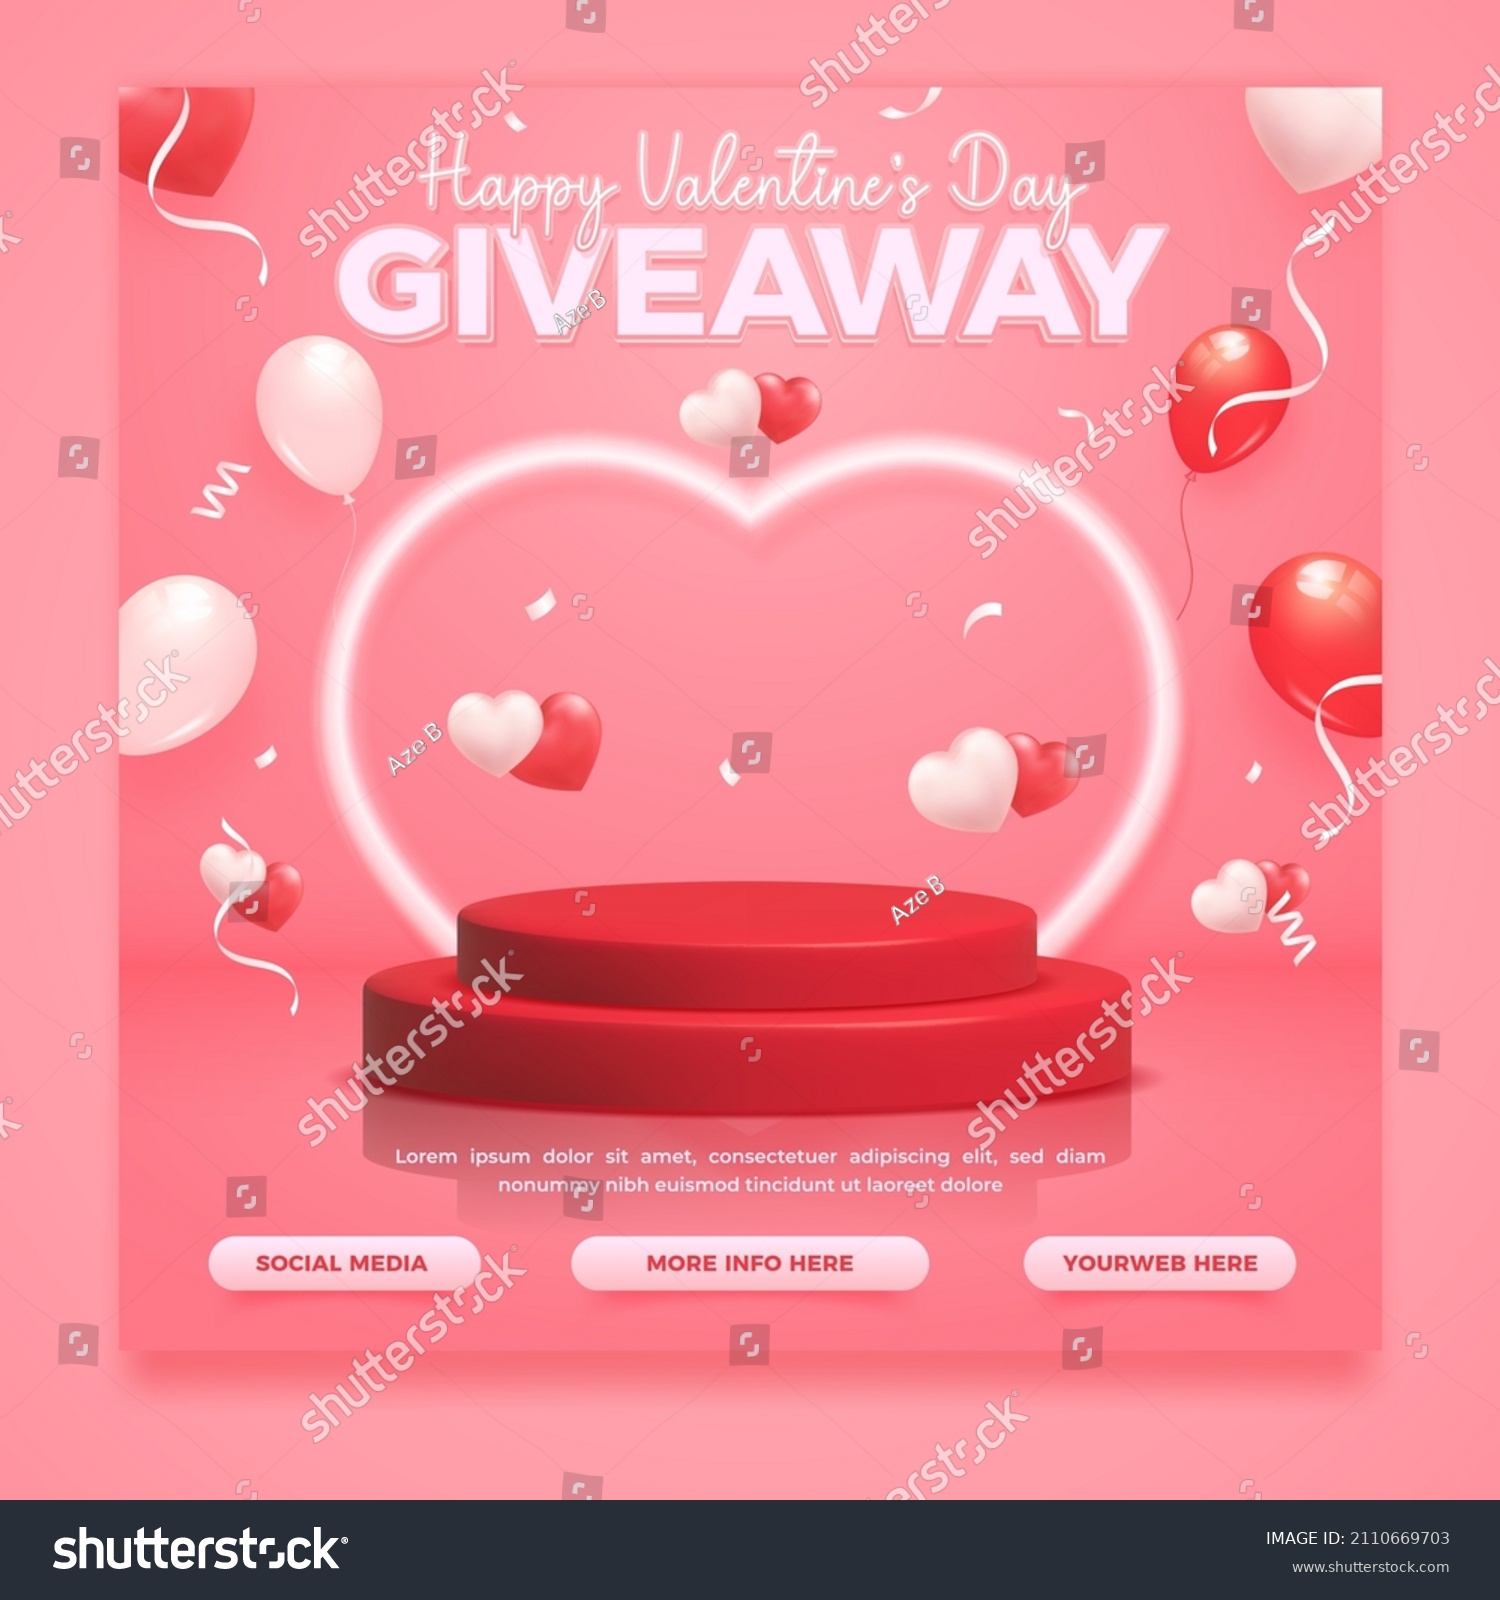 Valentine's day giveaway social media banner template #2110669703